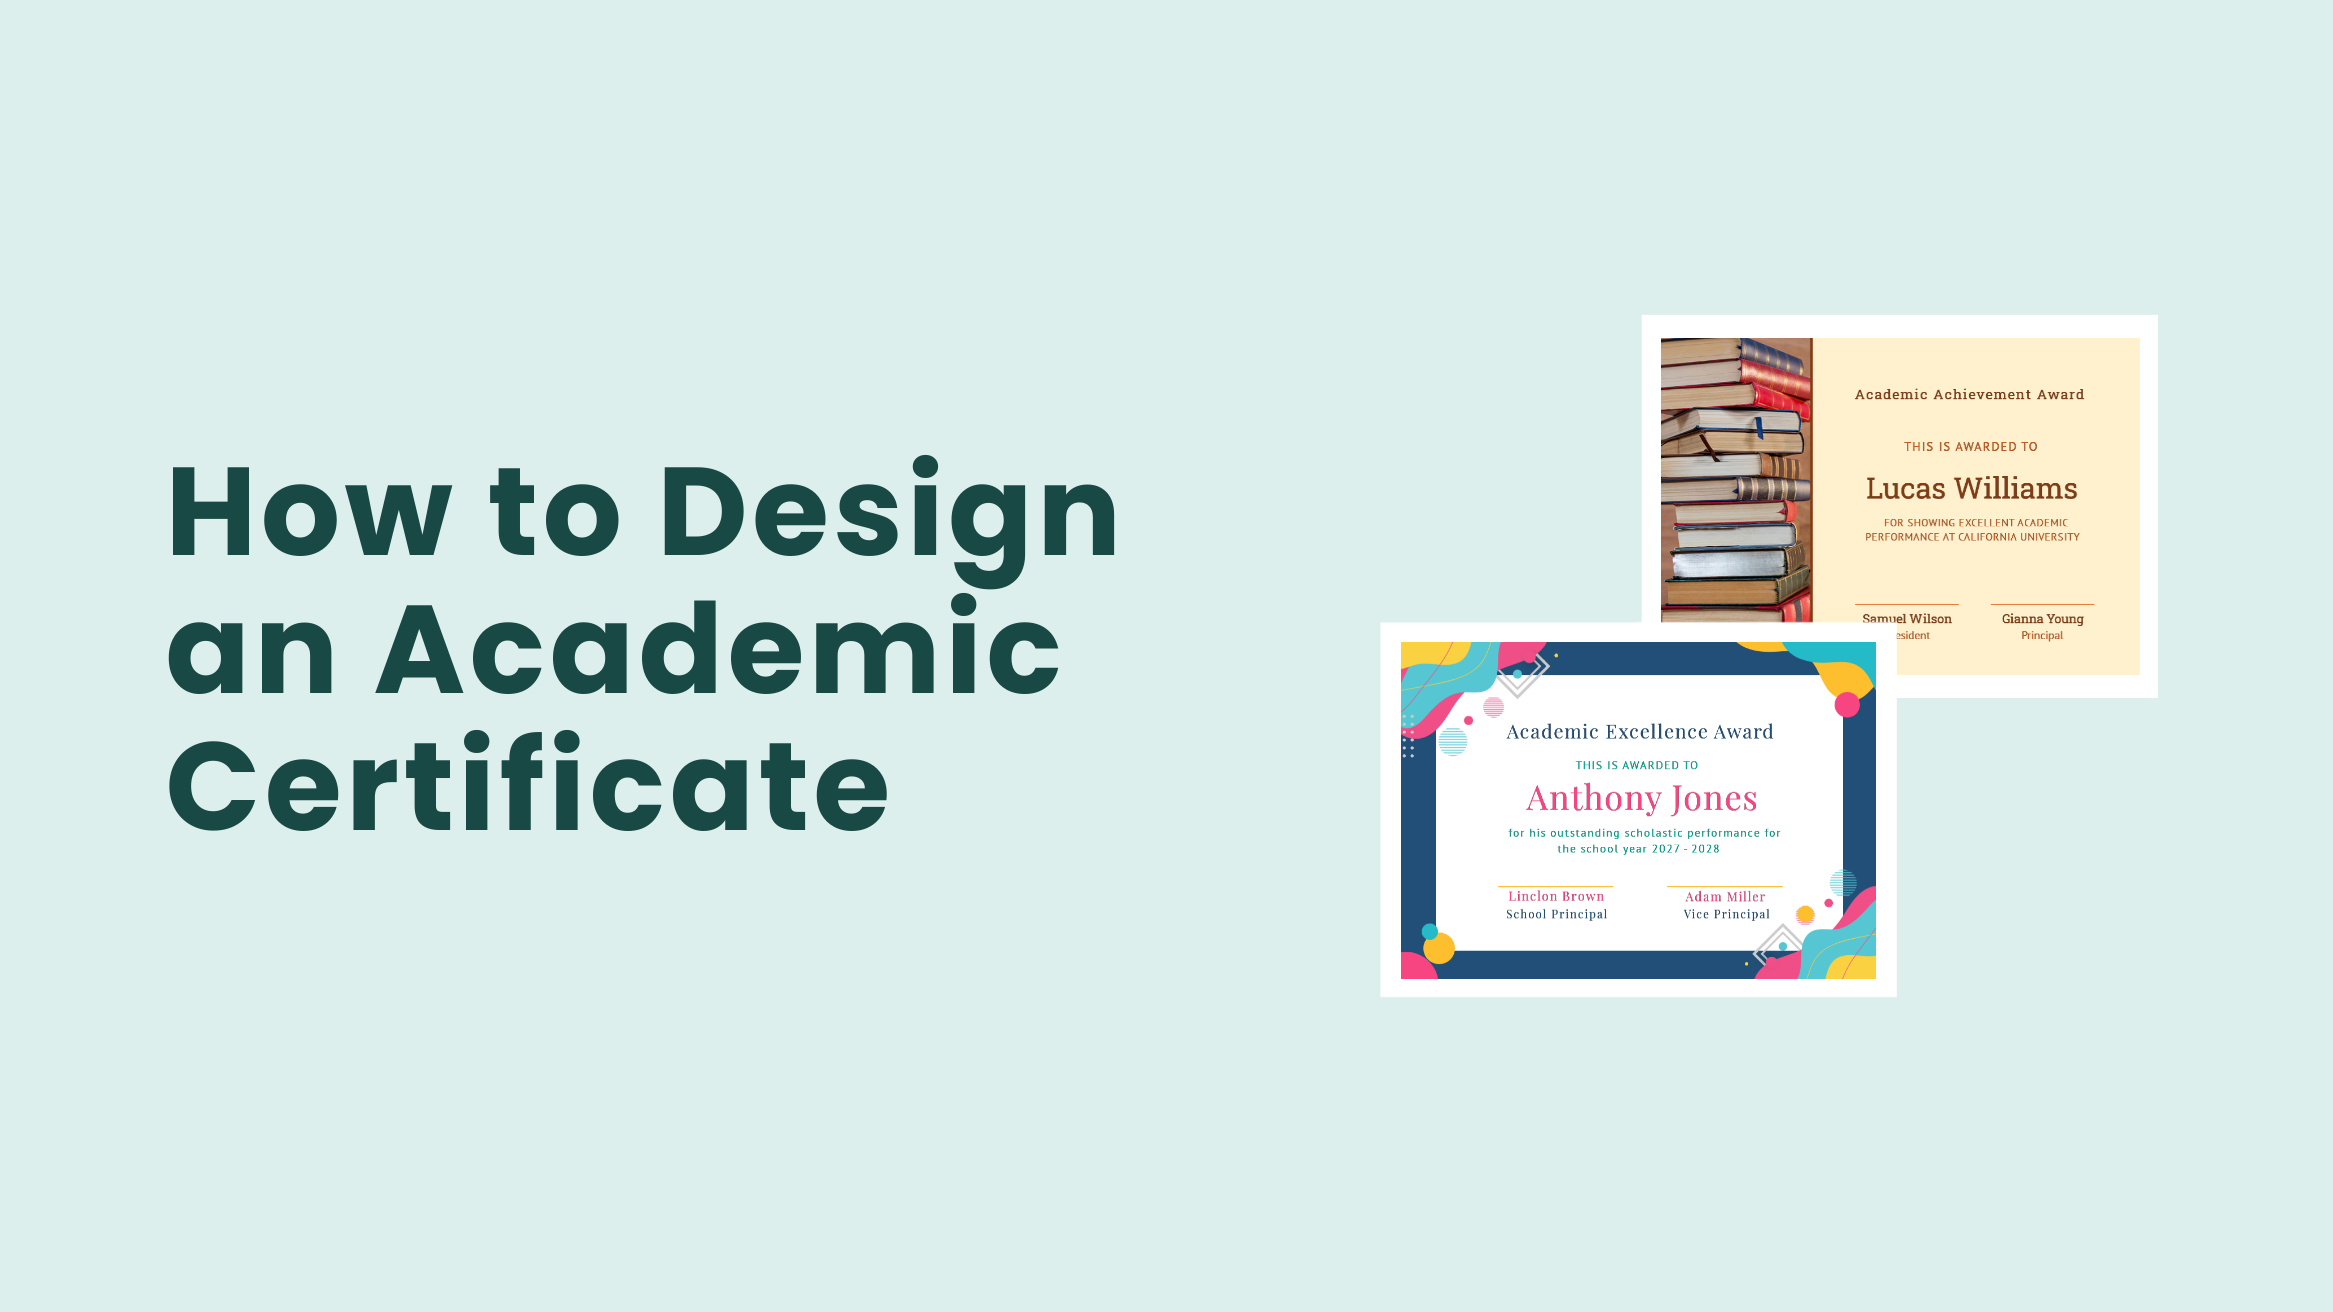 How to Design an Academic Certificate